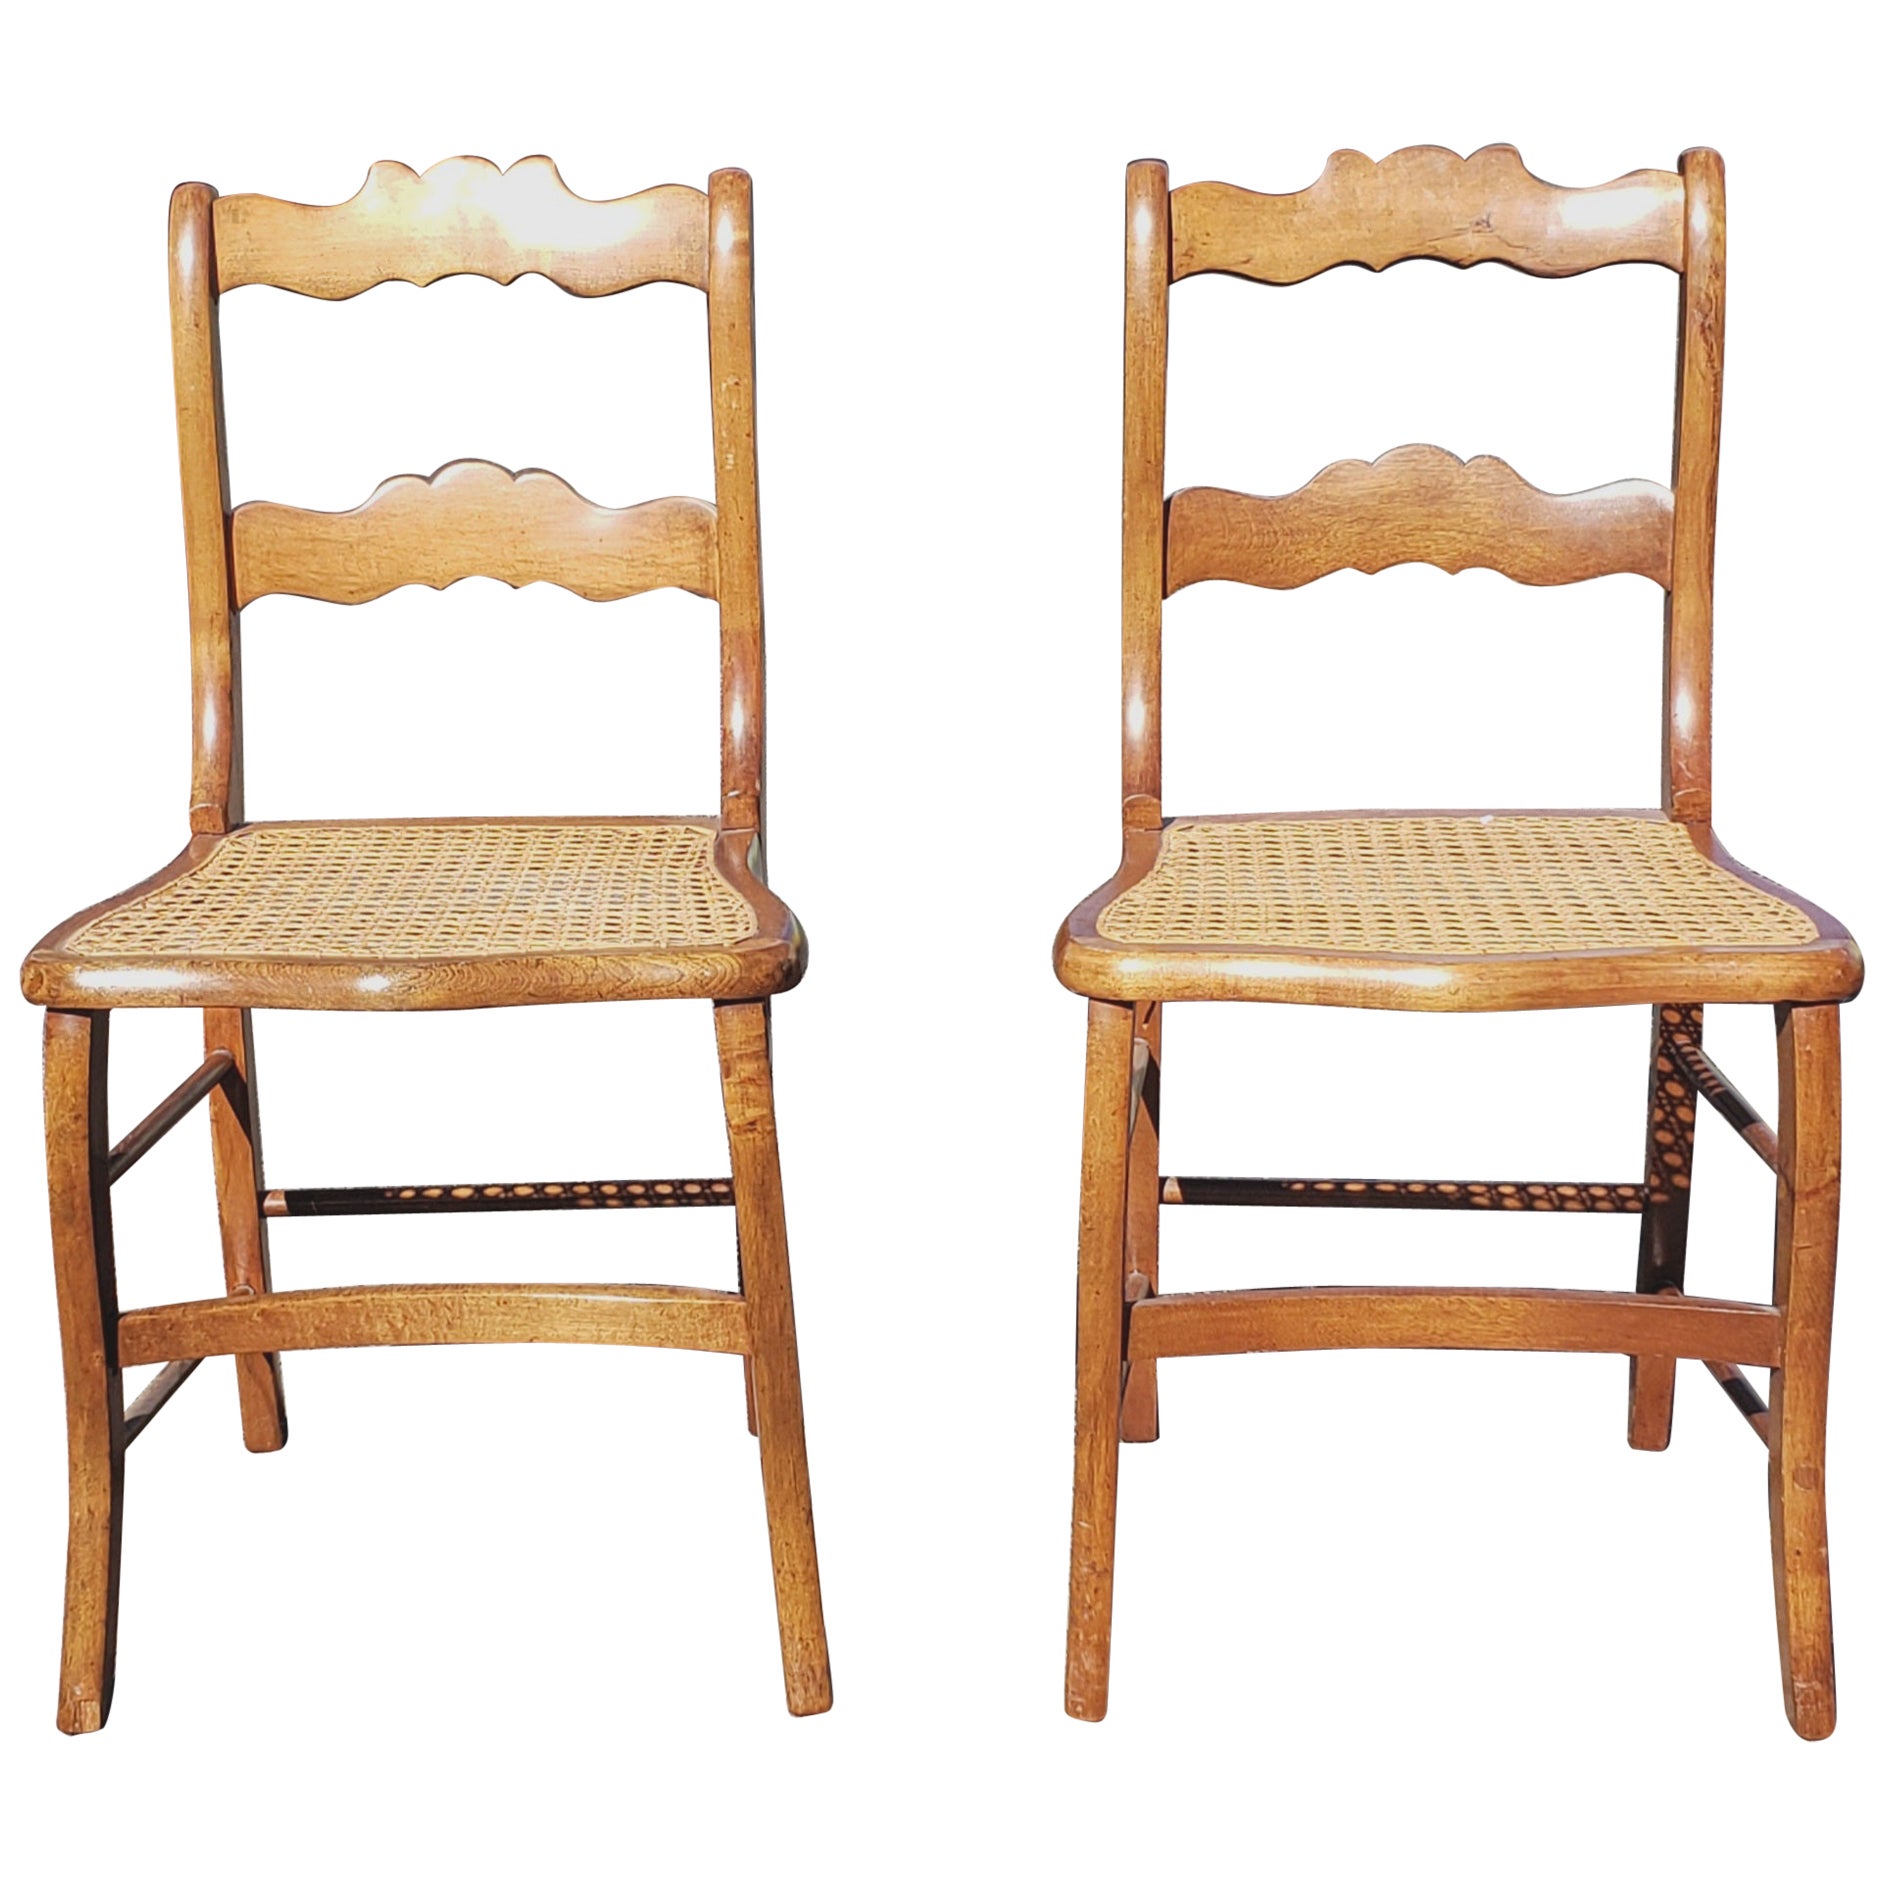 Early American Ladder Back Maple and Cane Seat Chairs, a Pair, circa 1880s For Sale